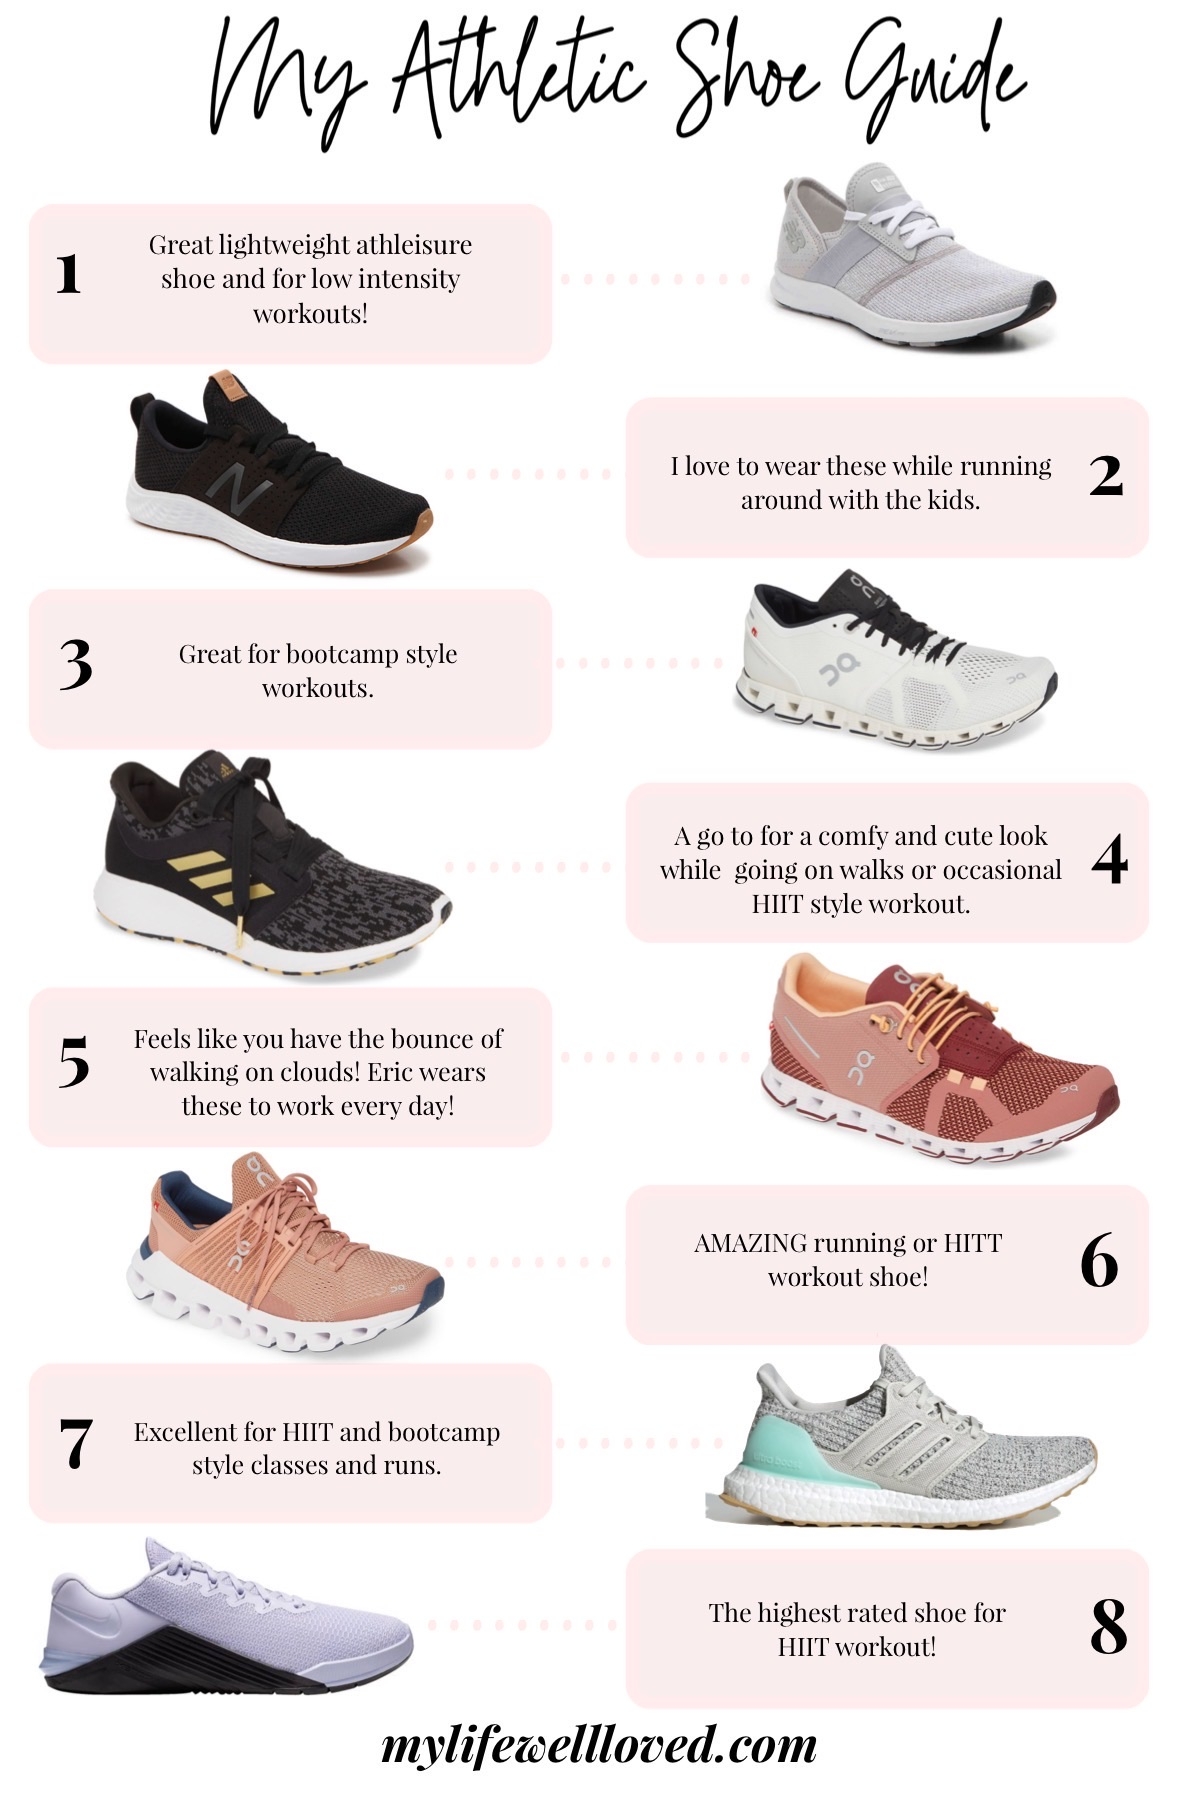 Why Choose the Right Women's Athletic Shoes?